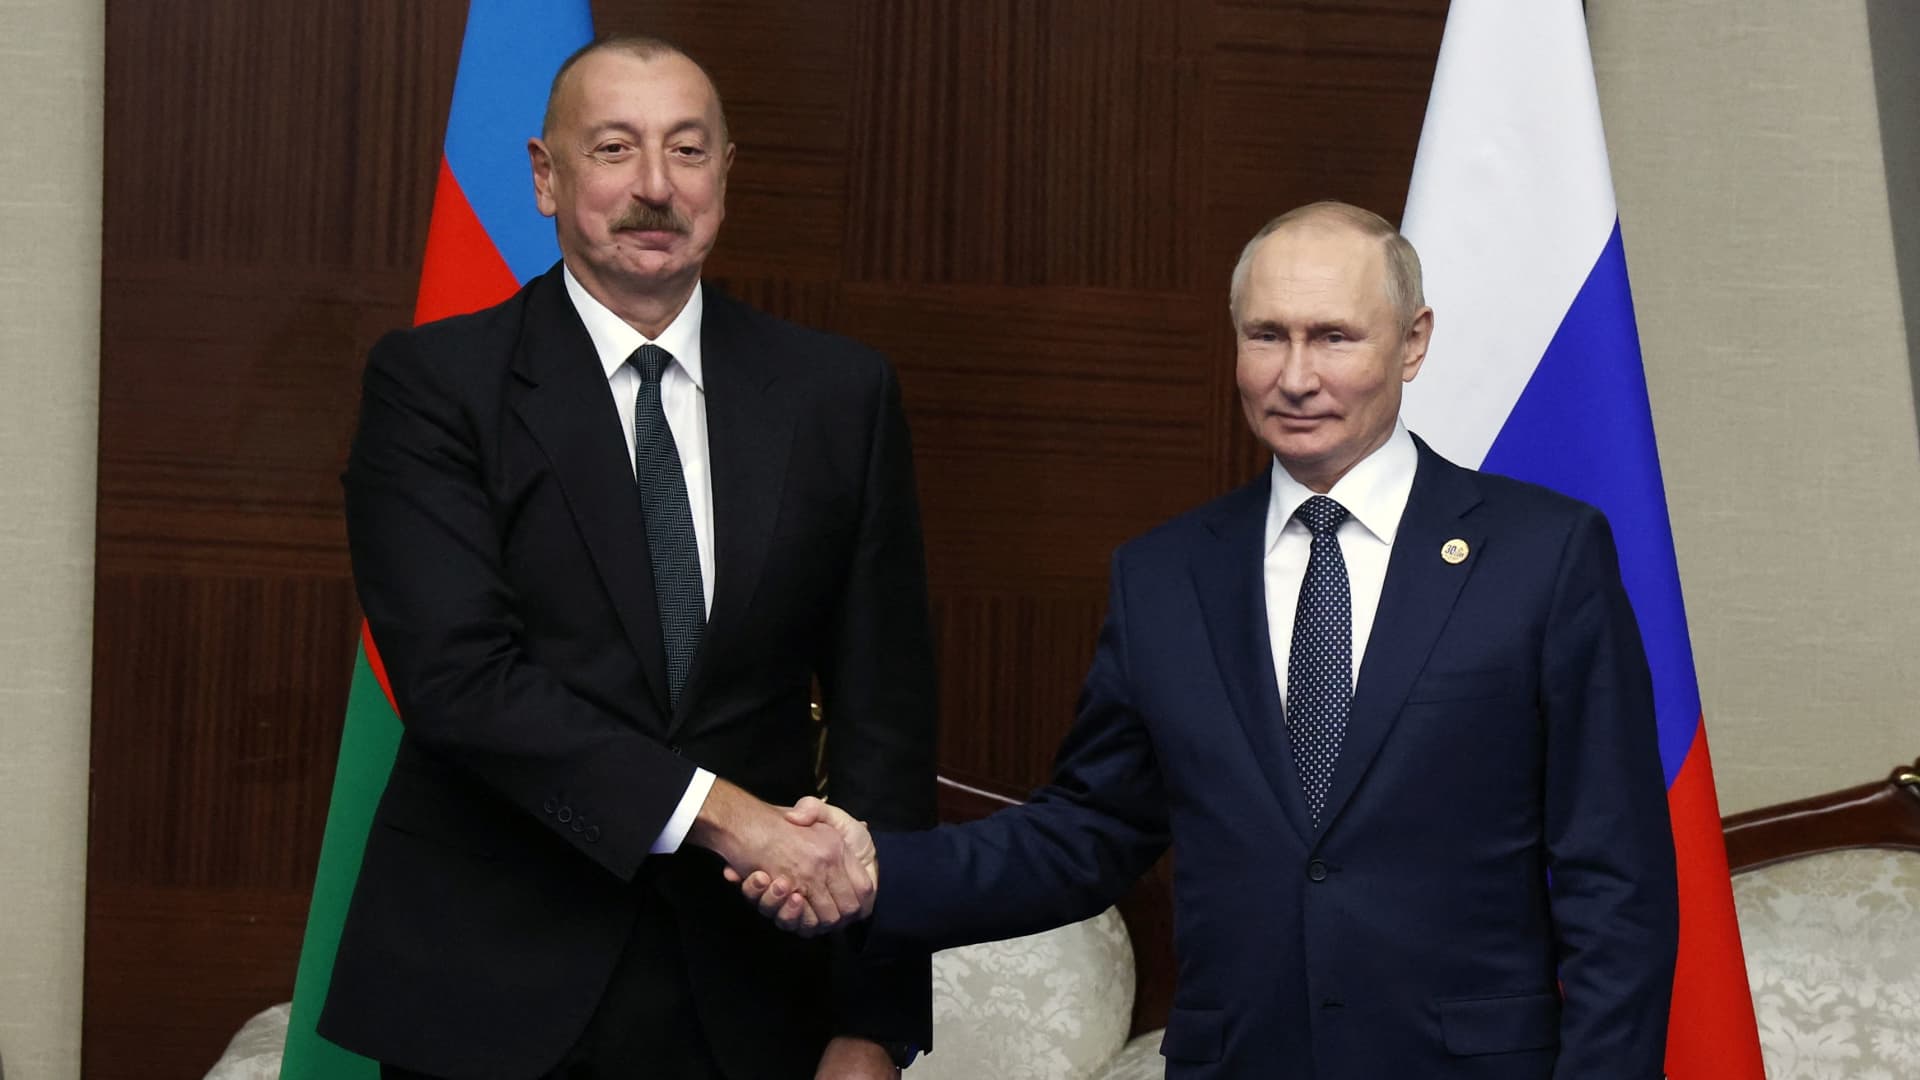 Russian President Vladimir Putin meets with Azeri President Ilham Aliyev on the sidelines of the Sixth Summit of the Conference on Interaction and Confidence Building Measures in Asia (CICA) in Astana on October 13, 2022.